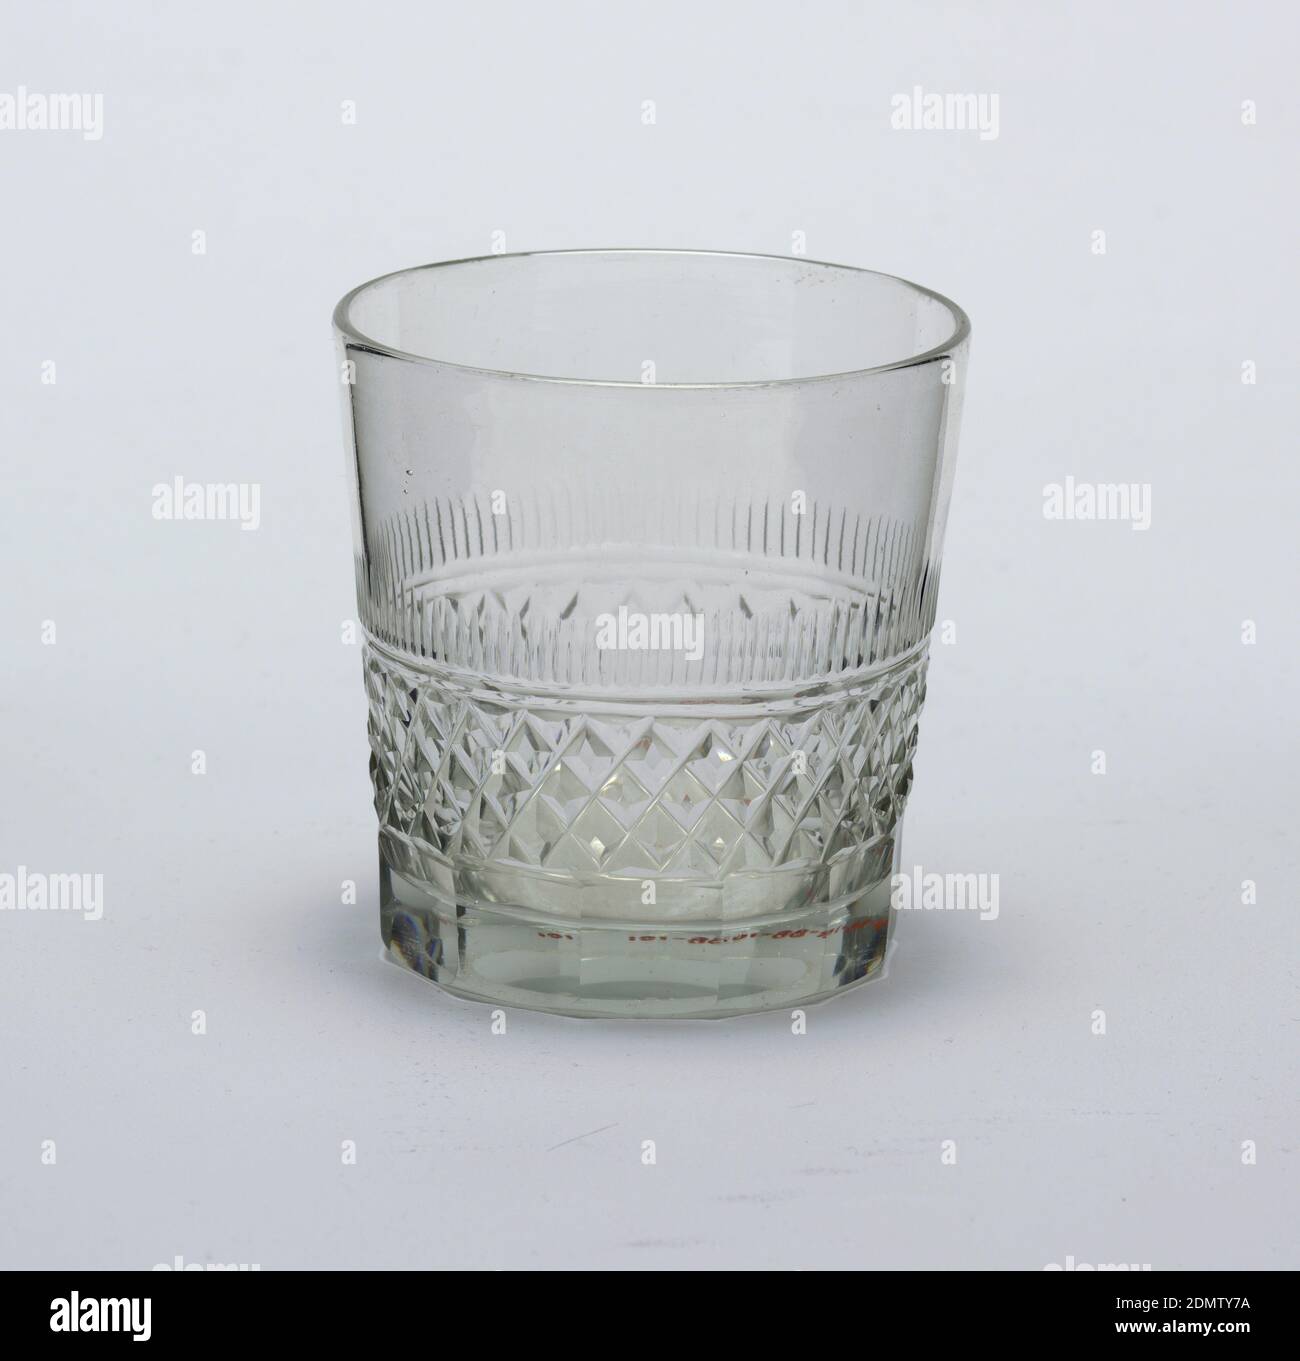 https://c8.alamy.com/comp/2DMTY7A/glass-glass-medium-heavy-glass-plain-tumbler-shape-with-straight-flaring-sides-lower-side-divided-into-two-nearly-equal-bands-the-lower-cut-to-form-a-polygonal-based-of-thirteen-sides-the-upper-of-shallow-diamond-cutting-with-flattened-tops-above-a-double-incised-ring-is-a-band-of-short-vertical-blazes-upper-two-fifths-of-tumbler-is-plain-base-is-heavy-and-underside-has-a-shallow-circular-depression-waterford-ireland-182030-glasswares-decorative-arts-glass-2DMTY7A.jpg